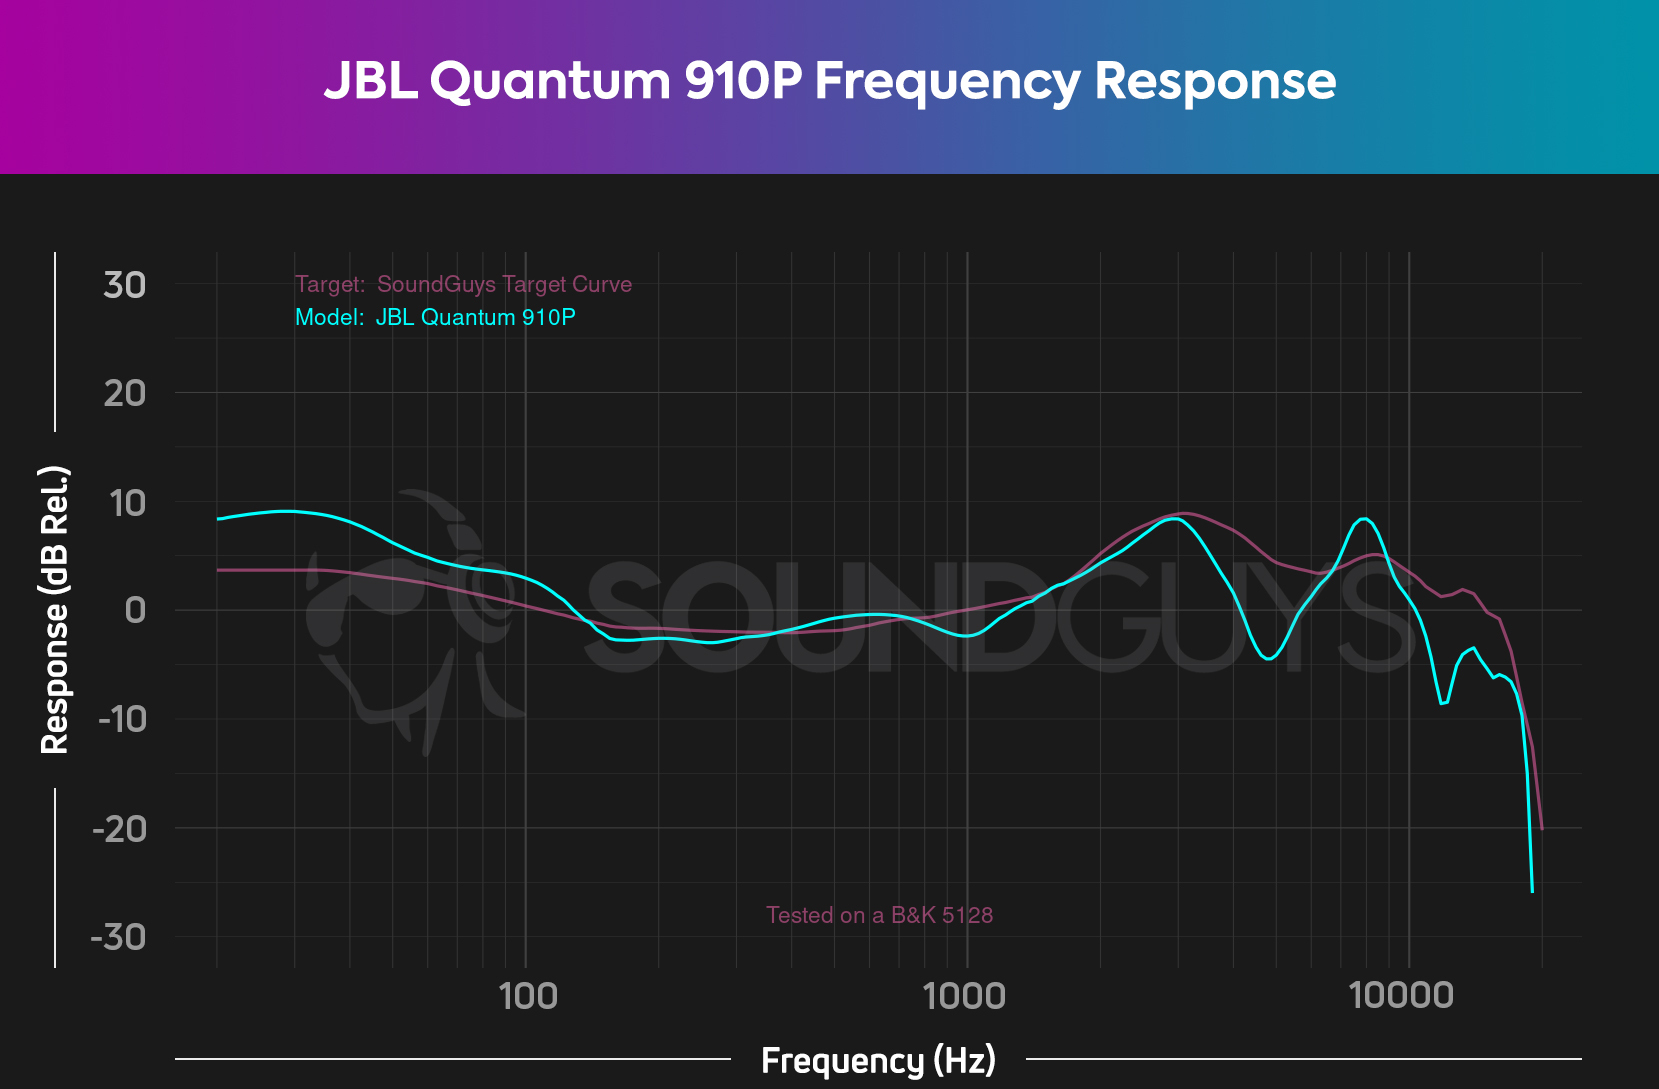 The JBL Quantum 910P frequency response chart showing an emphasis on bass and a notch in the high end.